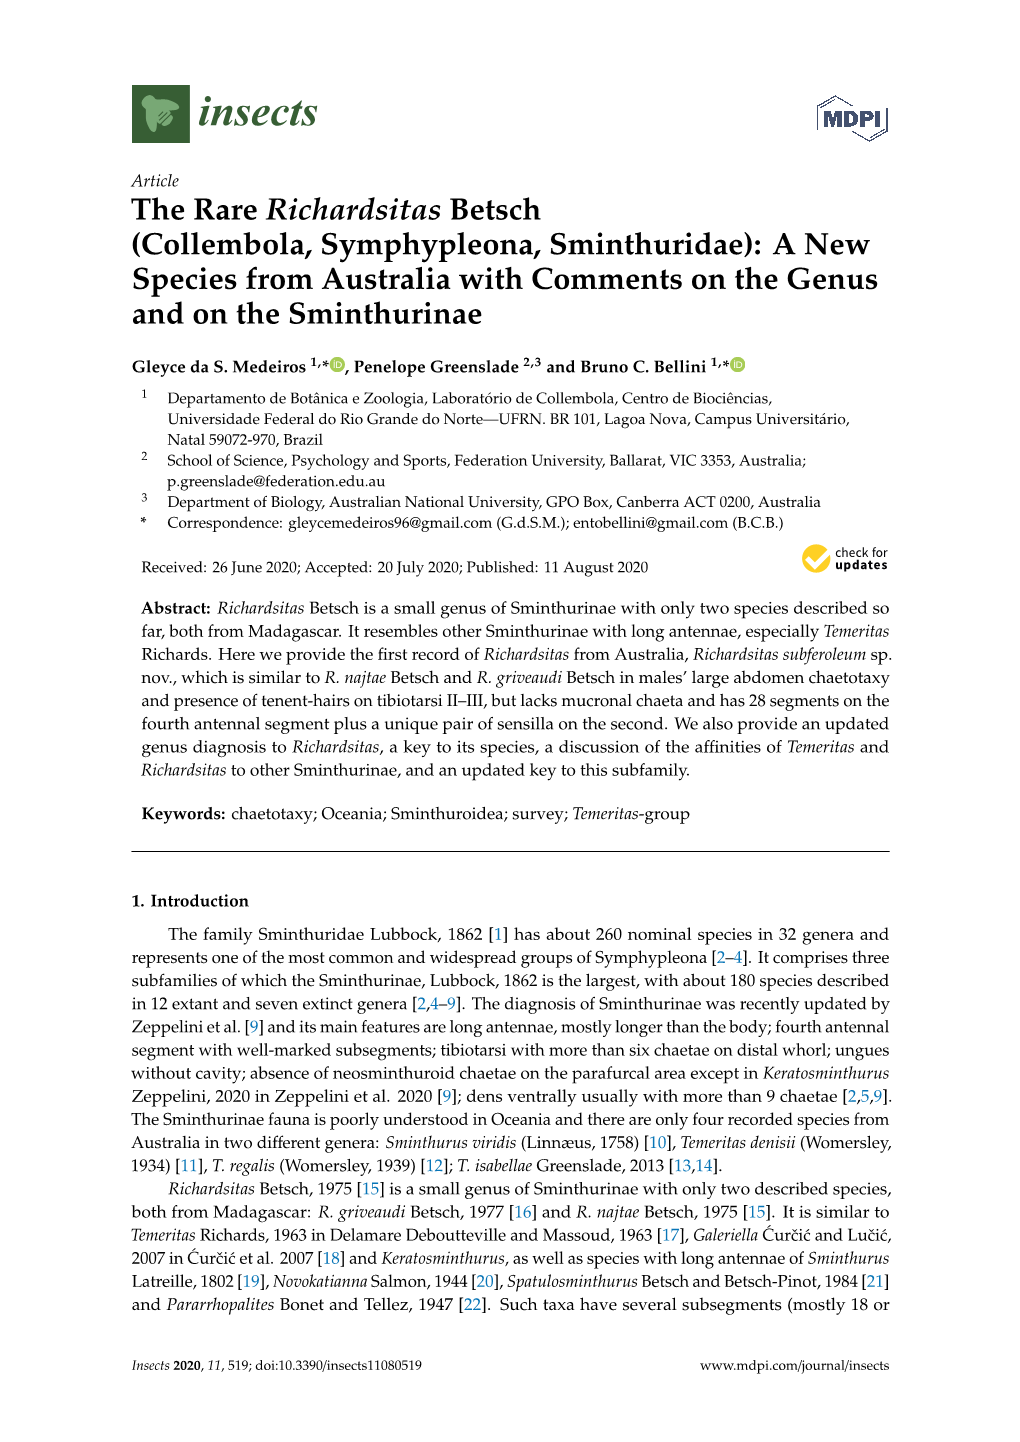 Collembola, Symphypleona, Sminthuridae): a New Species from Australia with Comments on the Genus and on the Sminthurinae